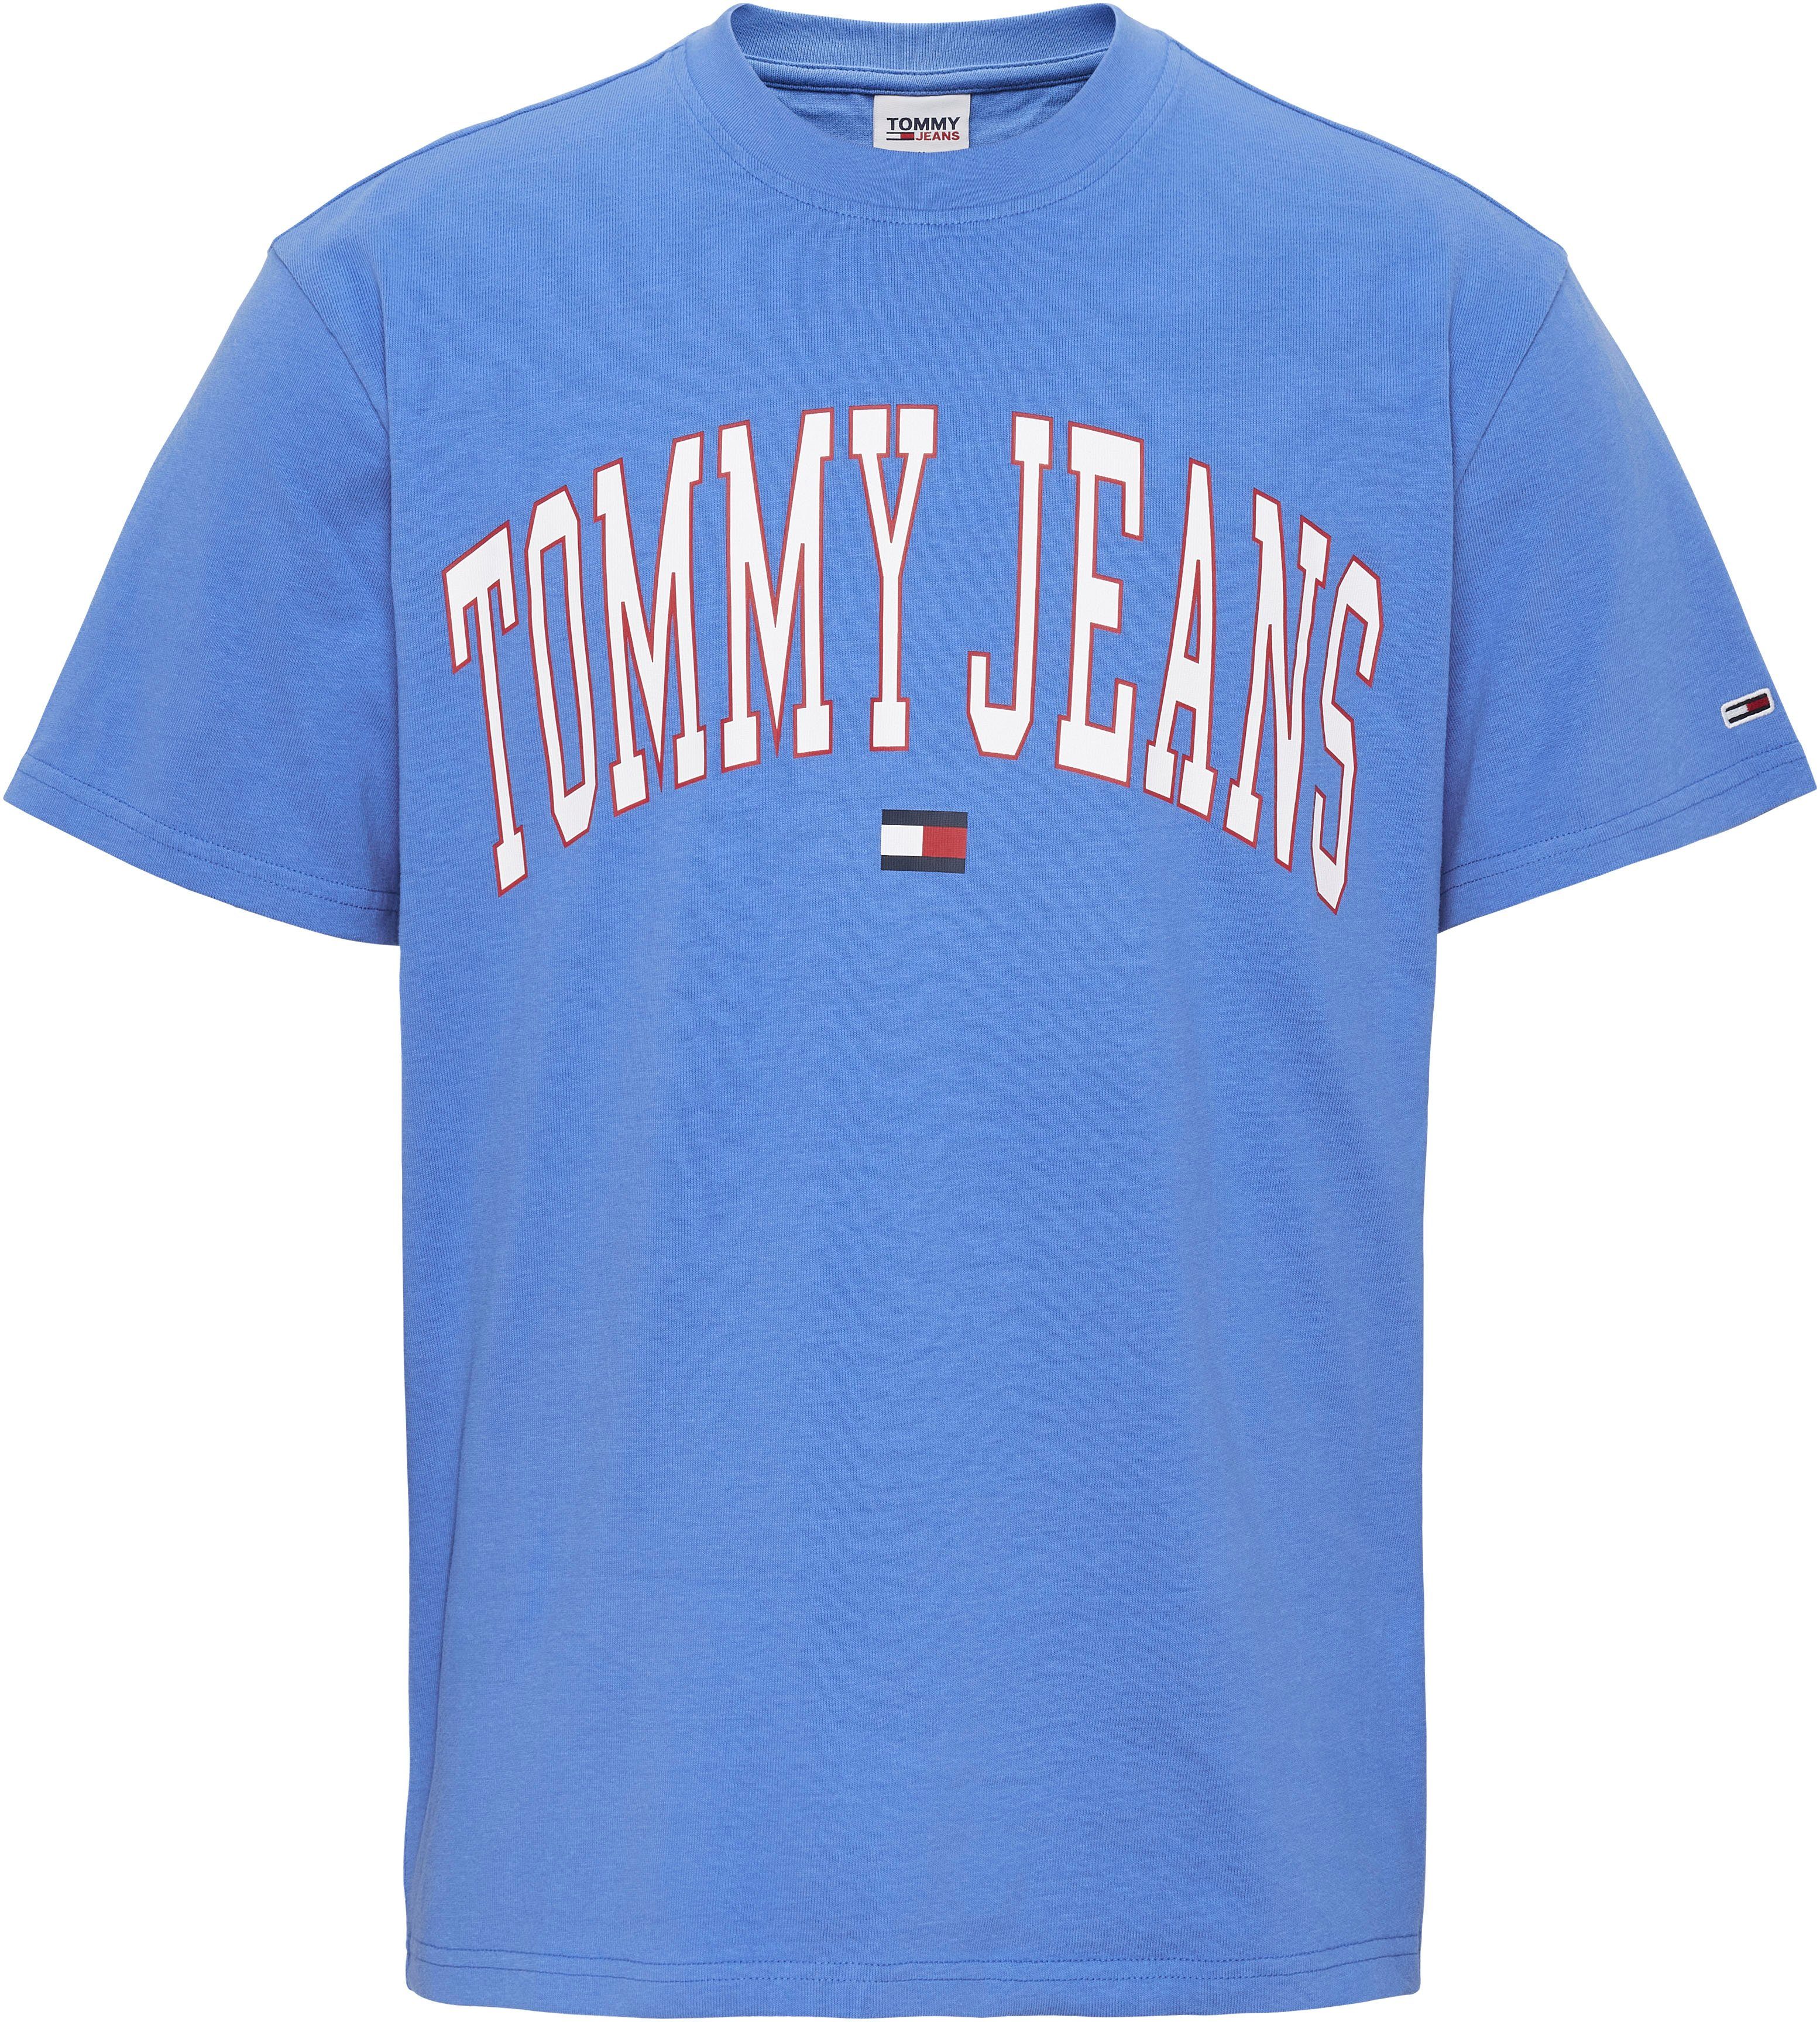 Blue TEE T-Shirt Mesmerizing COLLEGIATE TJM Jeans CLASSIC Tommy